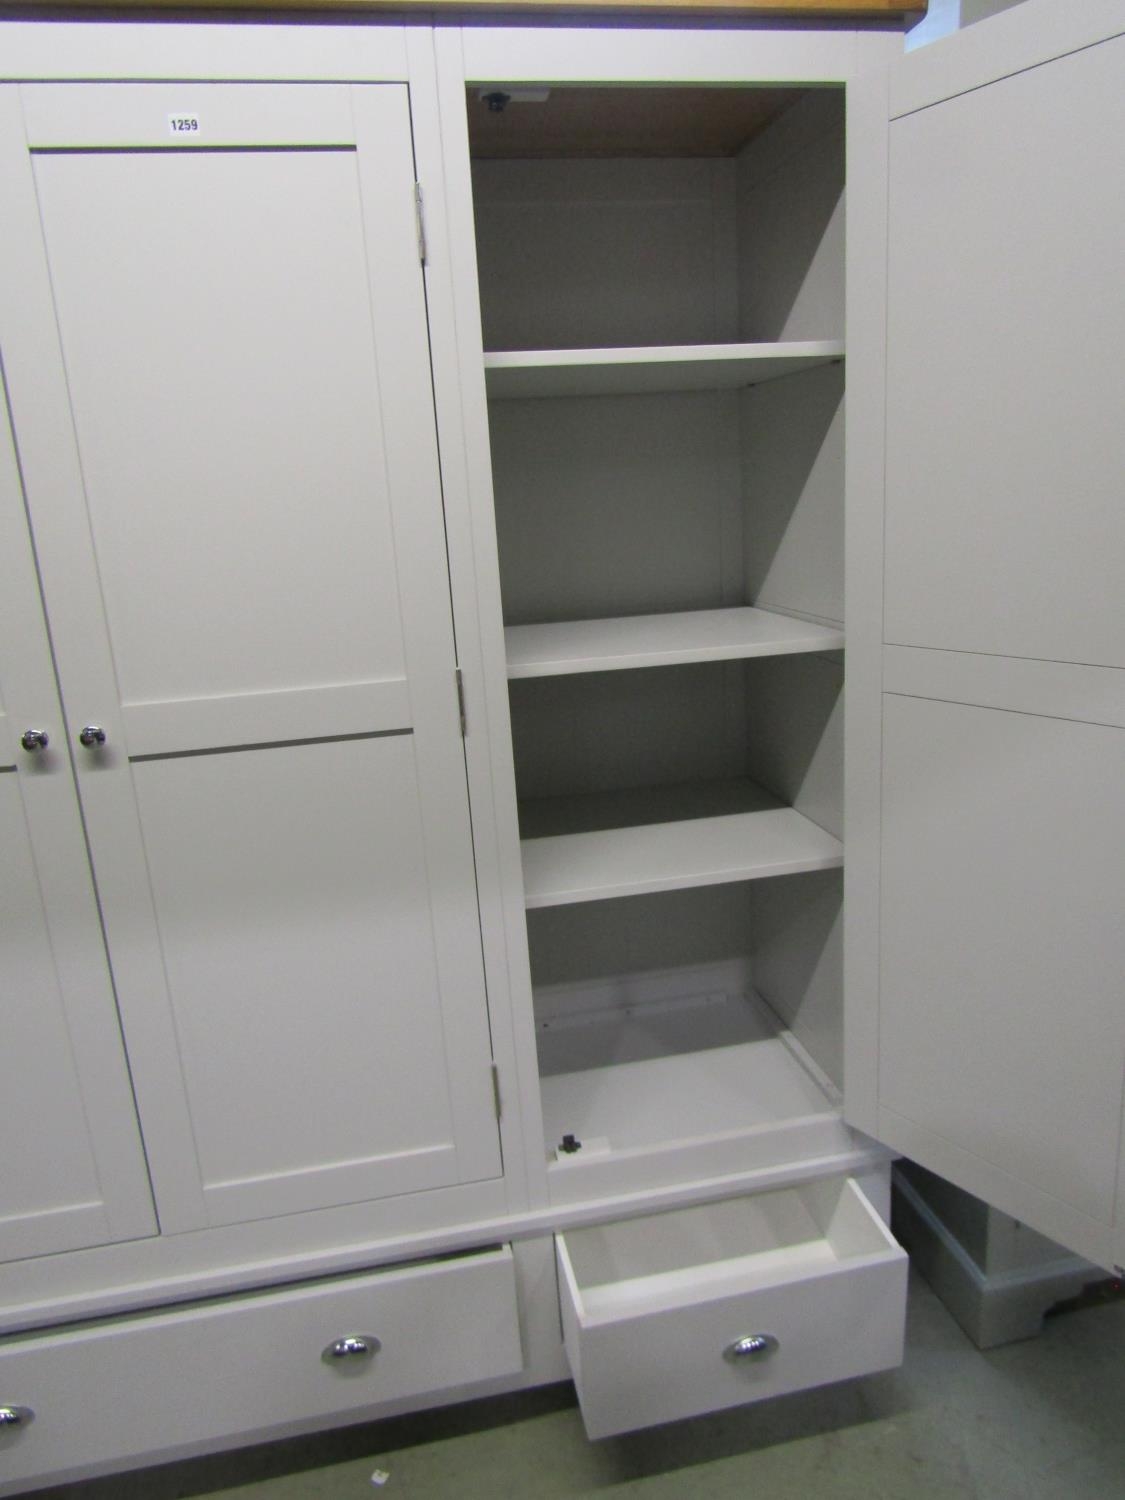 A Cotswold Company wardrobe in pebble grey, 160cm wide - Image 3 of 4